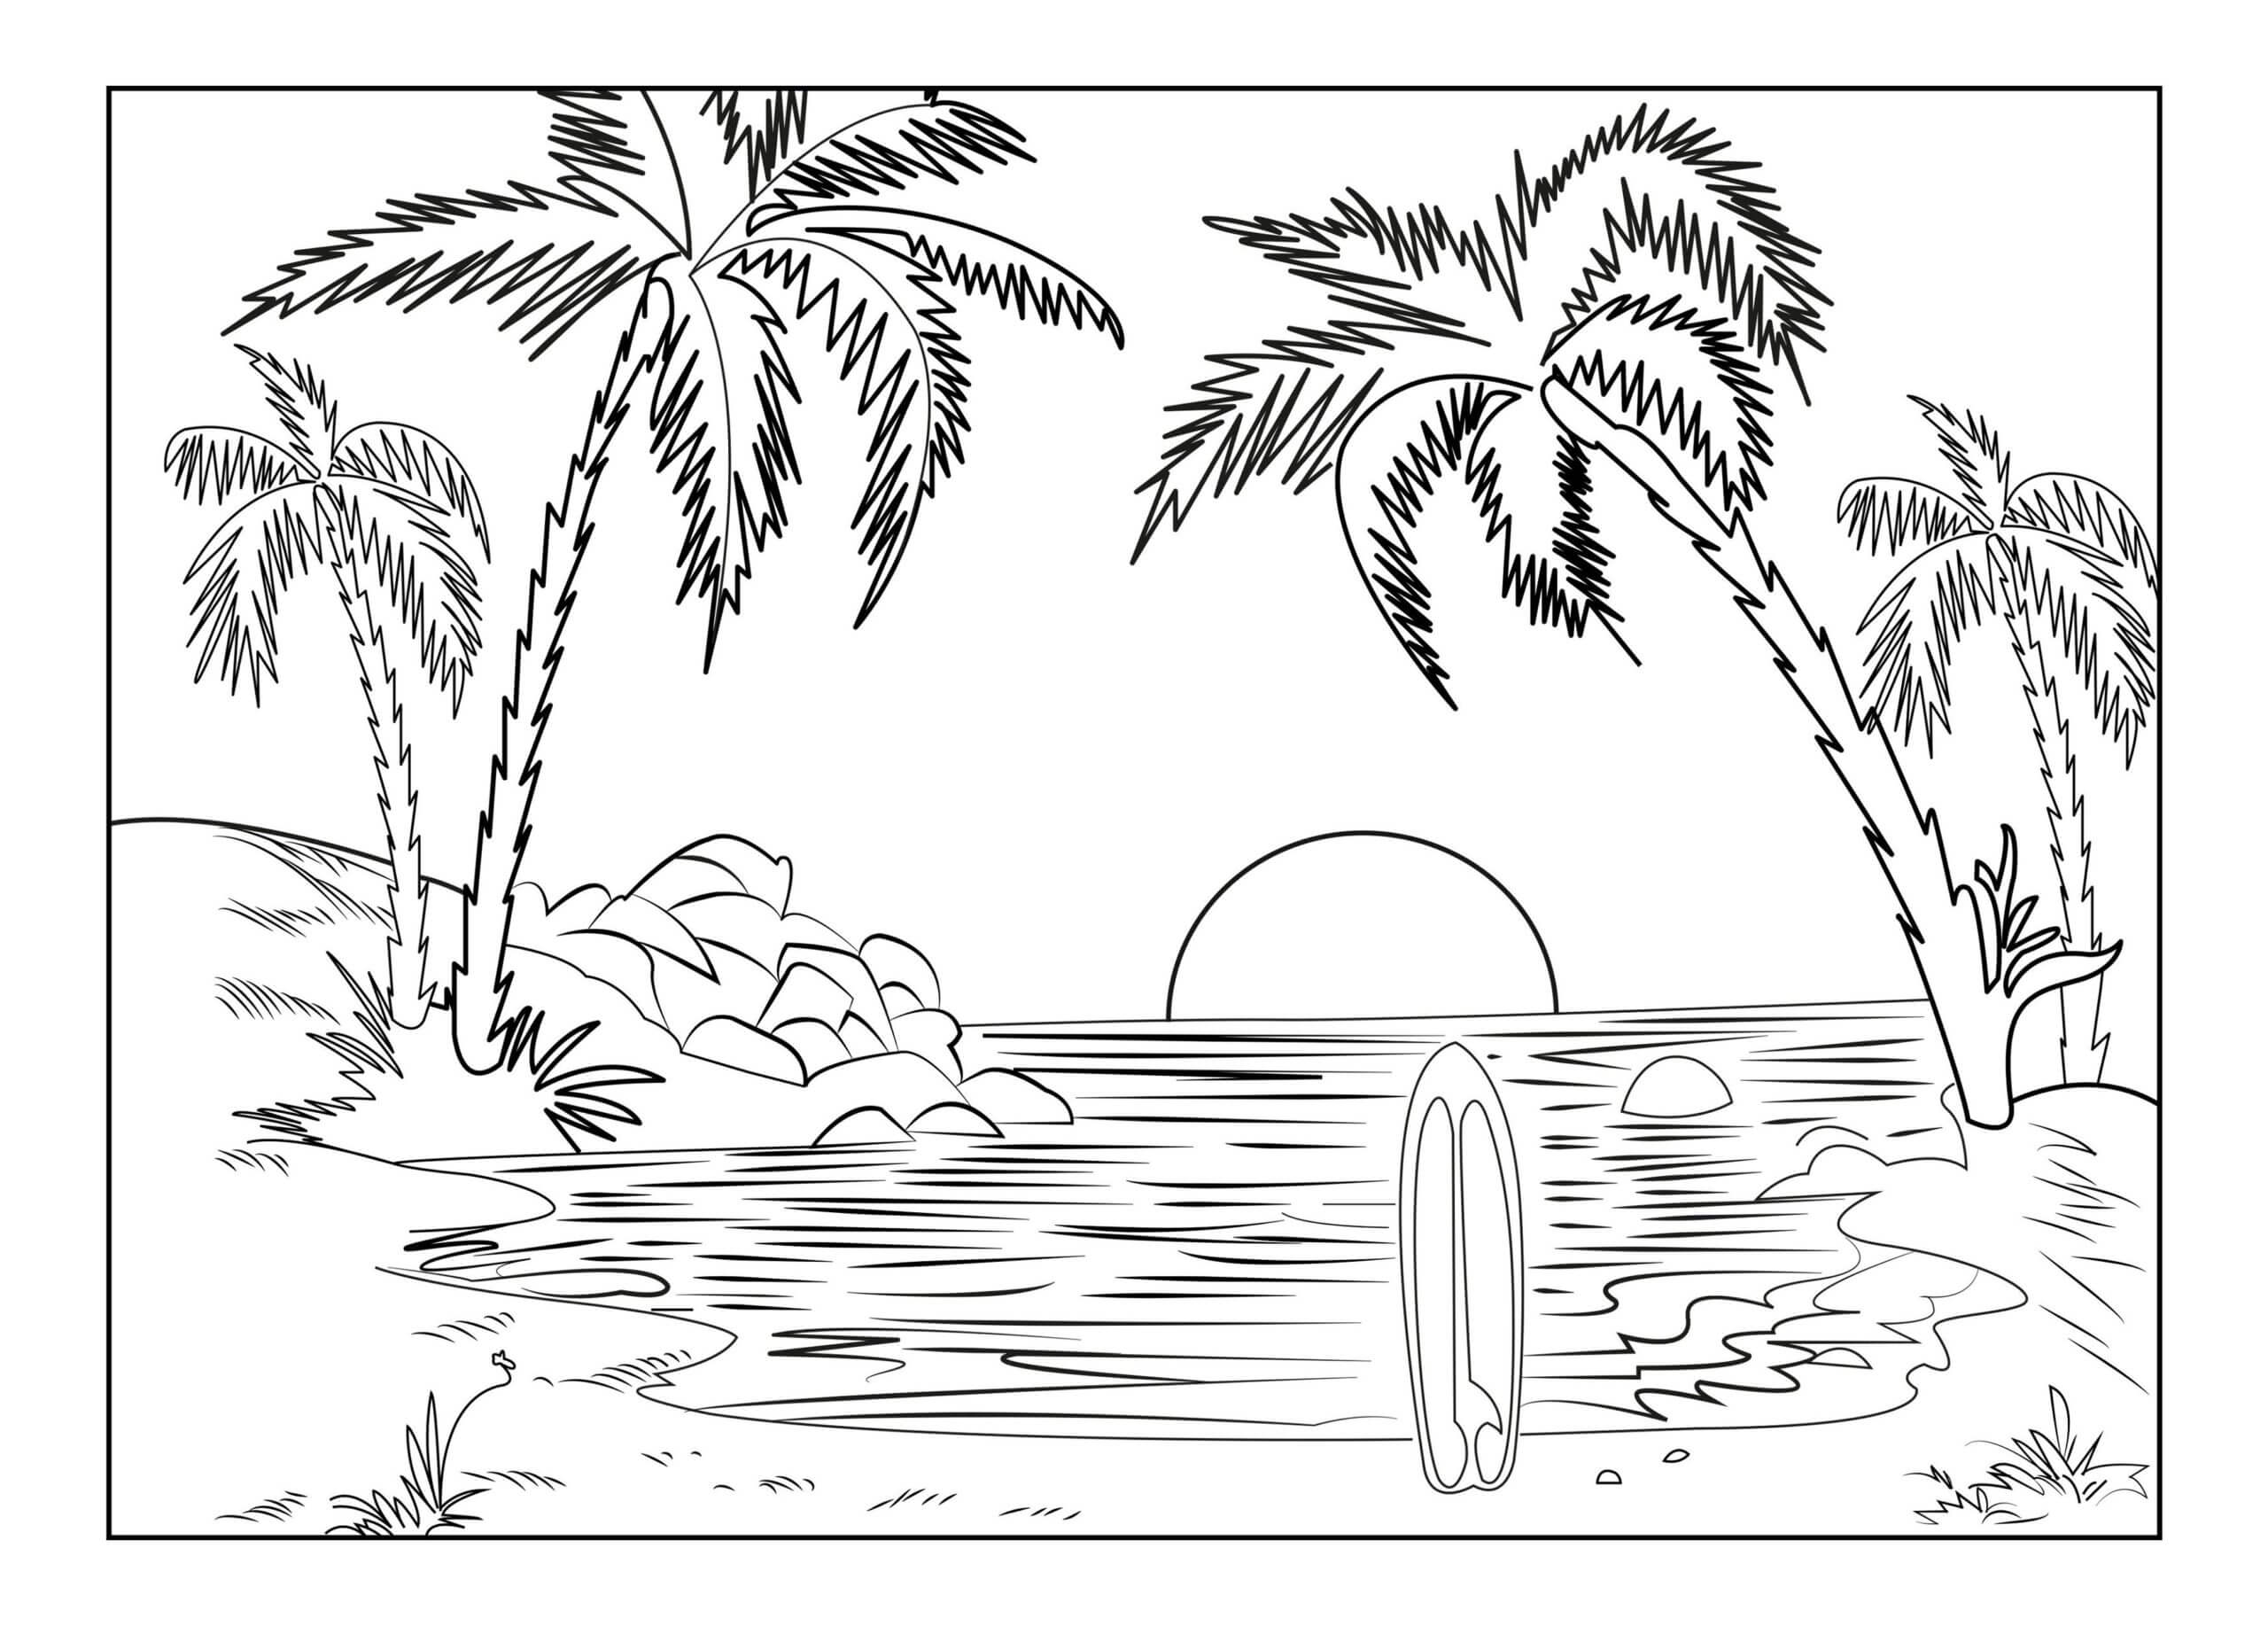 Sunset Landscape Coloring Page Free Printable Coloring Pages for Kids